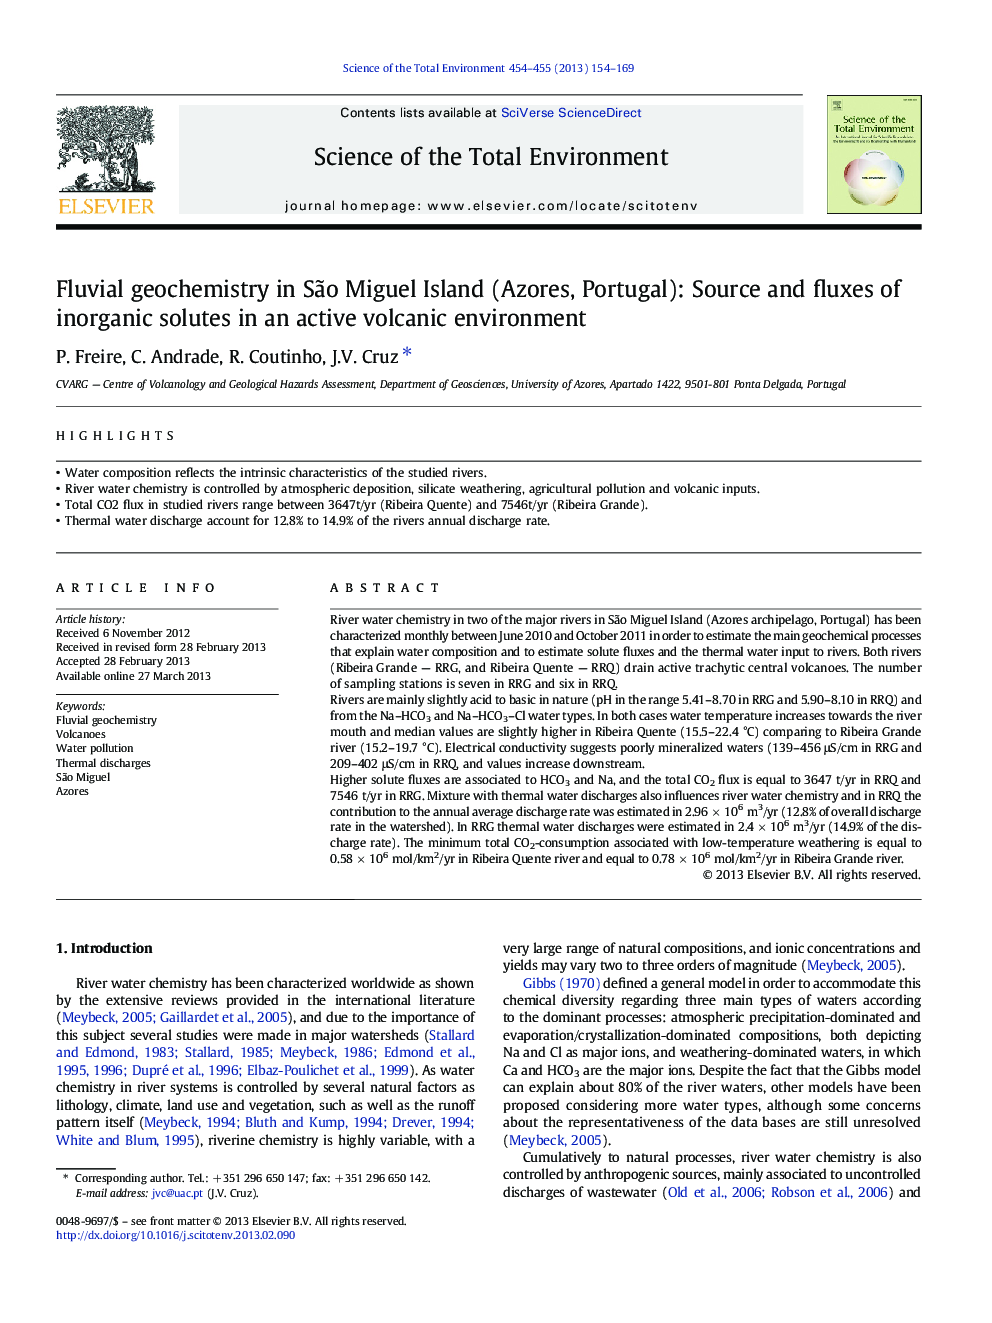 Fluvial geochemistry in SÃ£o Miguel Island (Azores, Portugal): Source and fluxes of inorganic solutes in an active volcanic environment